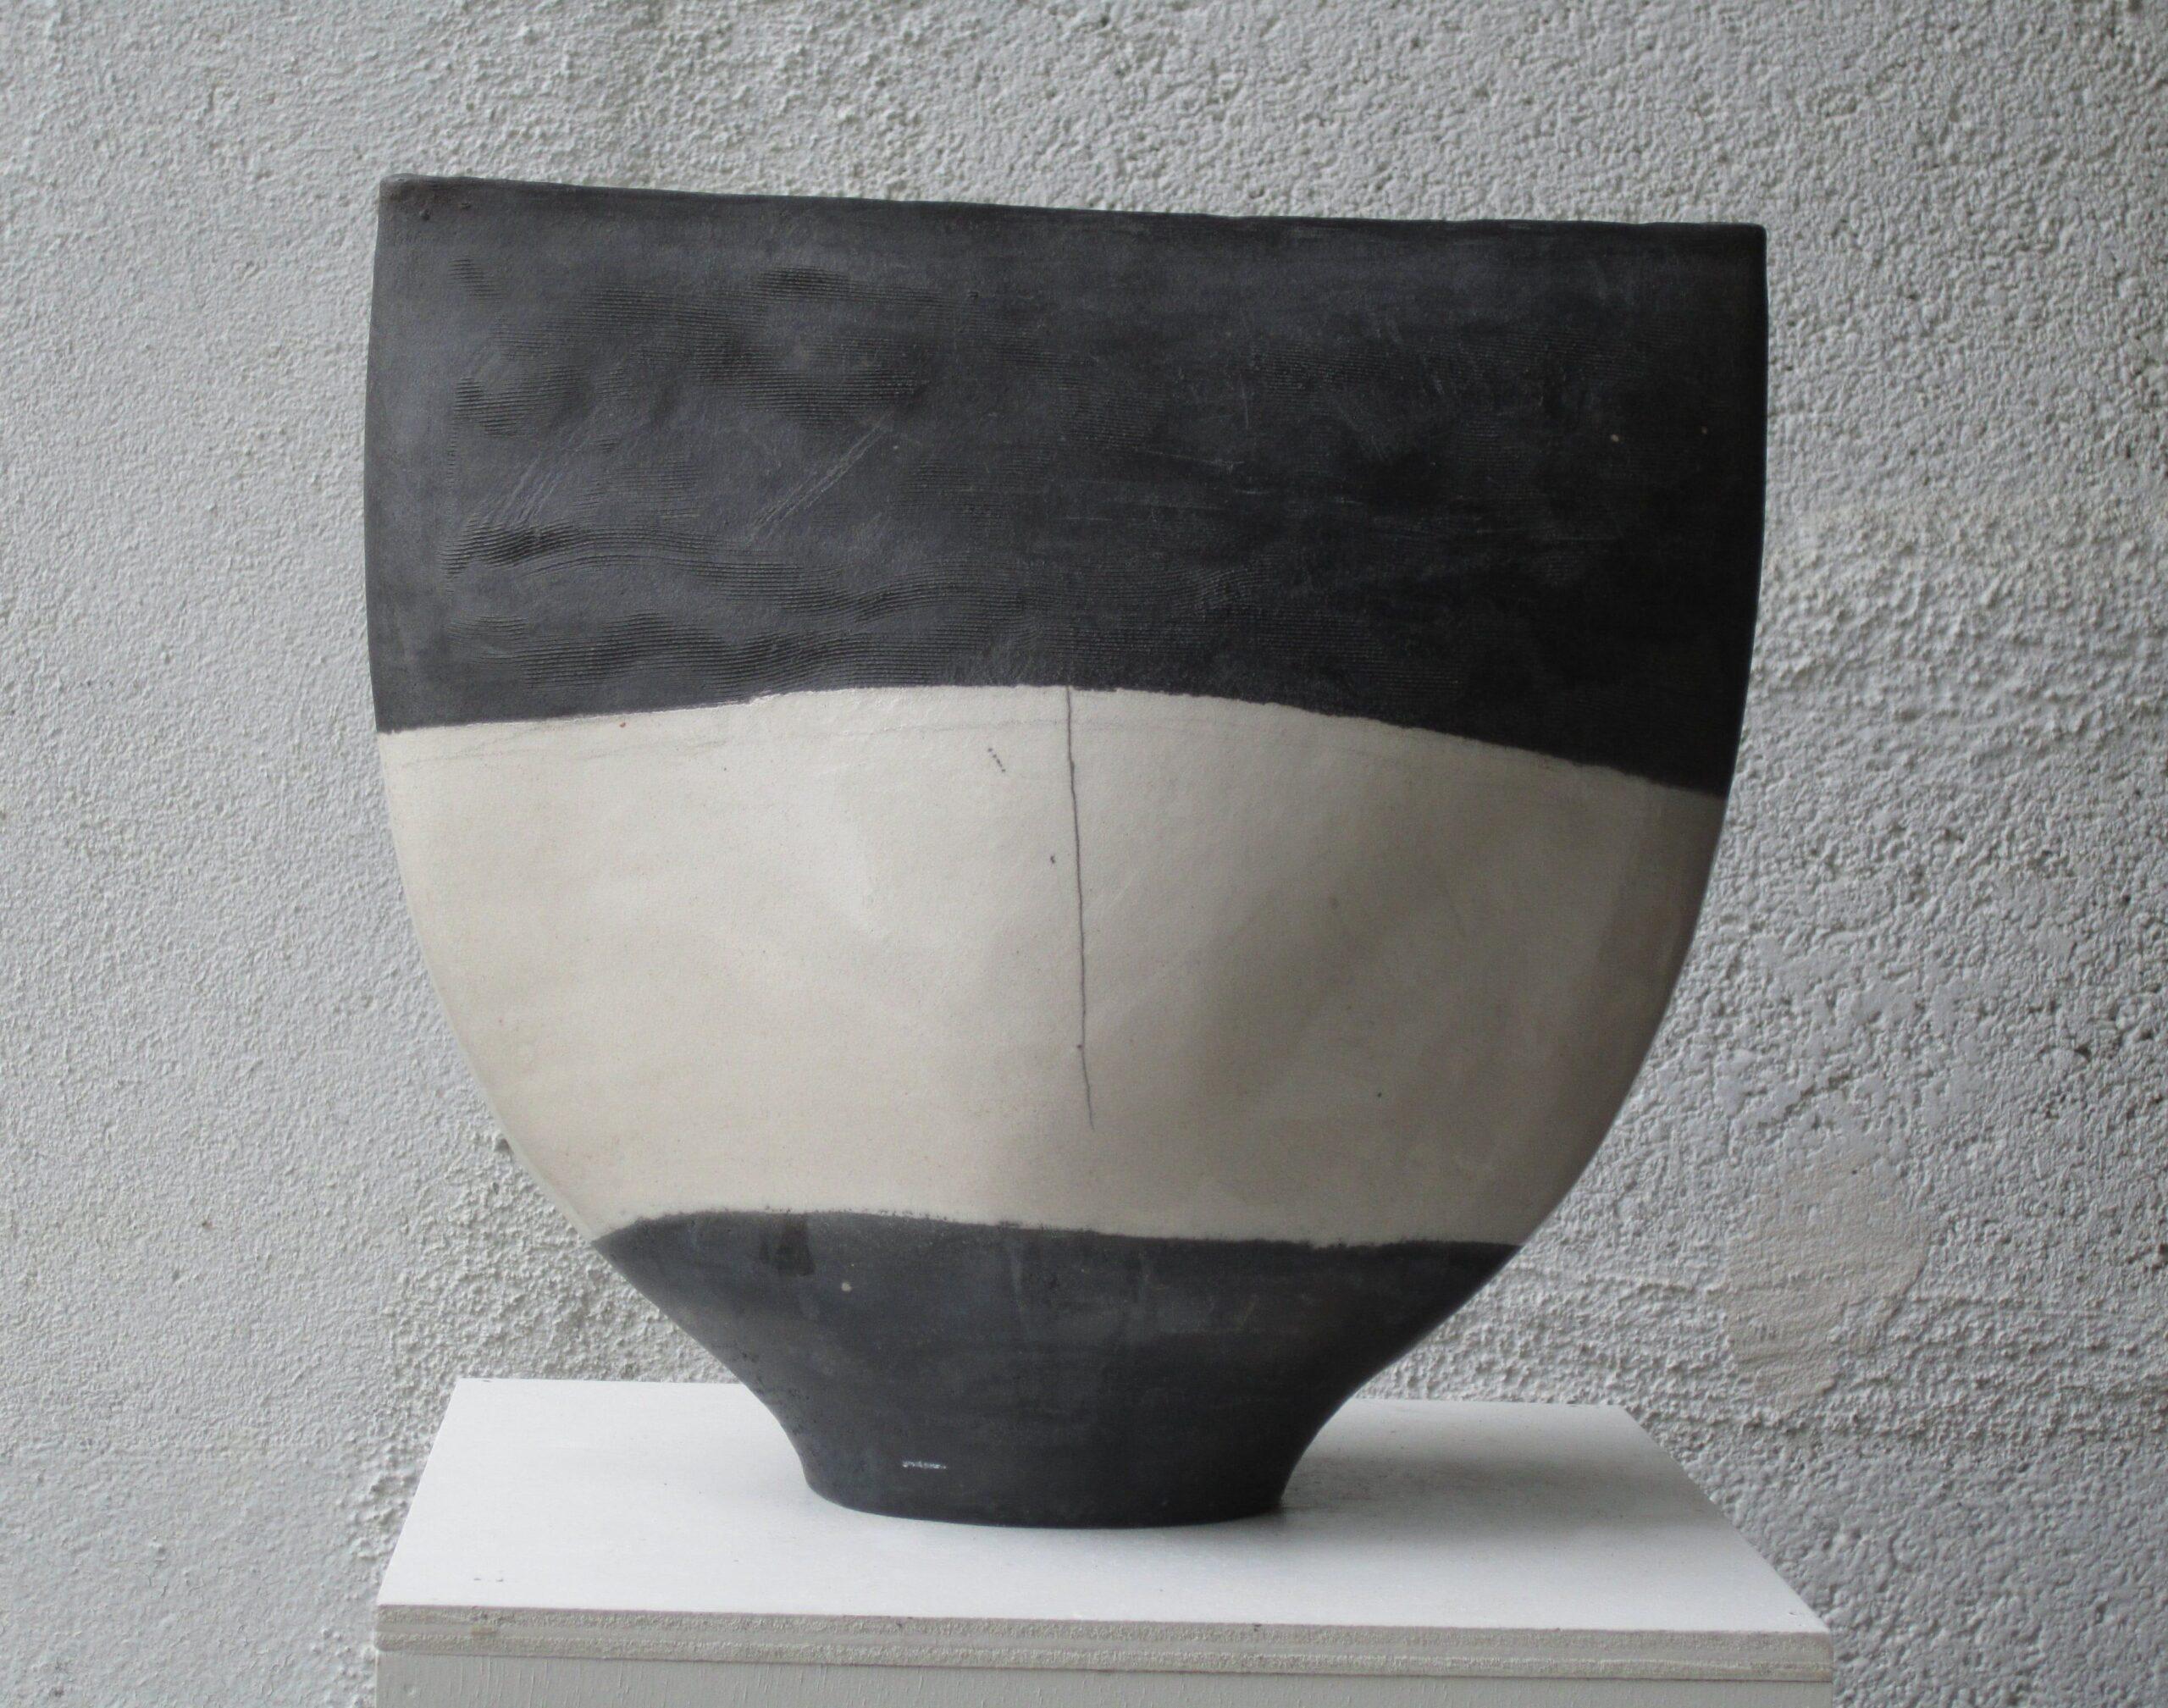 Bicolore is a unique ceramic sculpture by contemporary artist Tien Wen, dimensions are 28 × 29.5 × 17 cm (11 × 11.6 × 6.7 in). 
The sculpture is signed comes with a certificate of authenticity.

The purity of this sculpture, its manipulation of